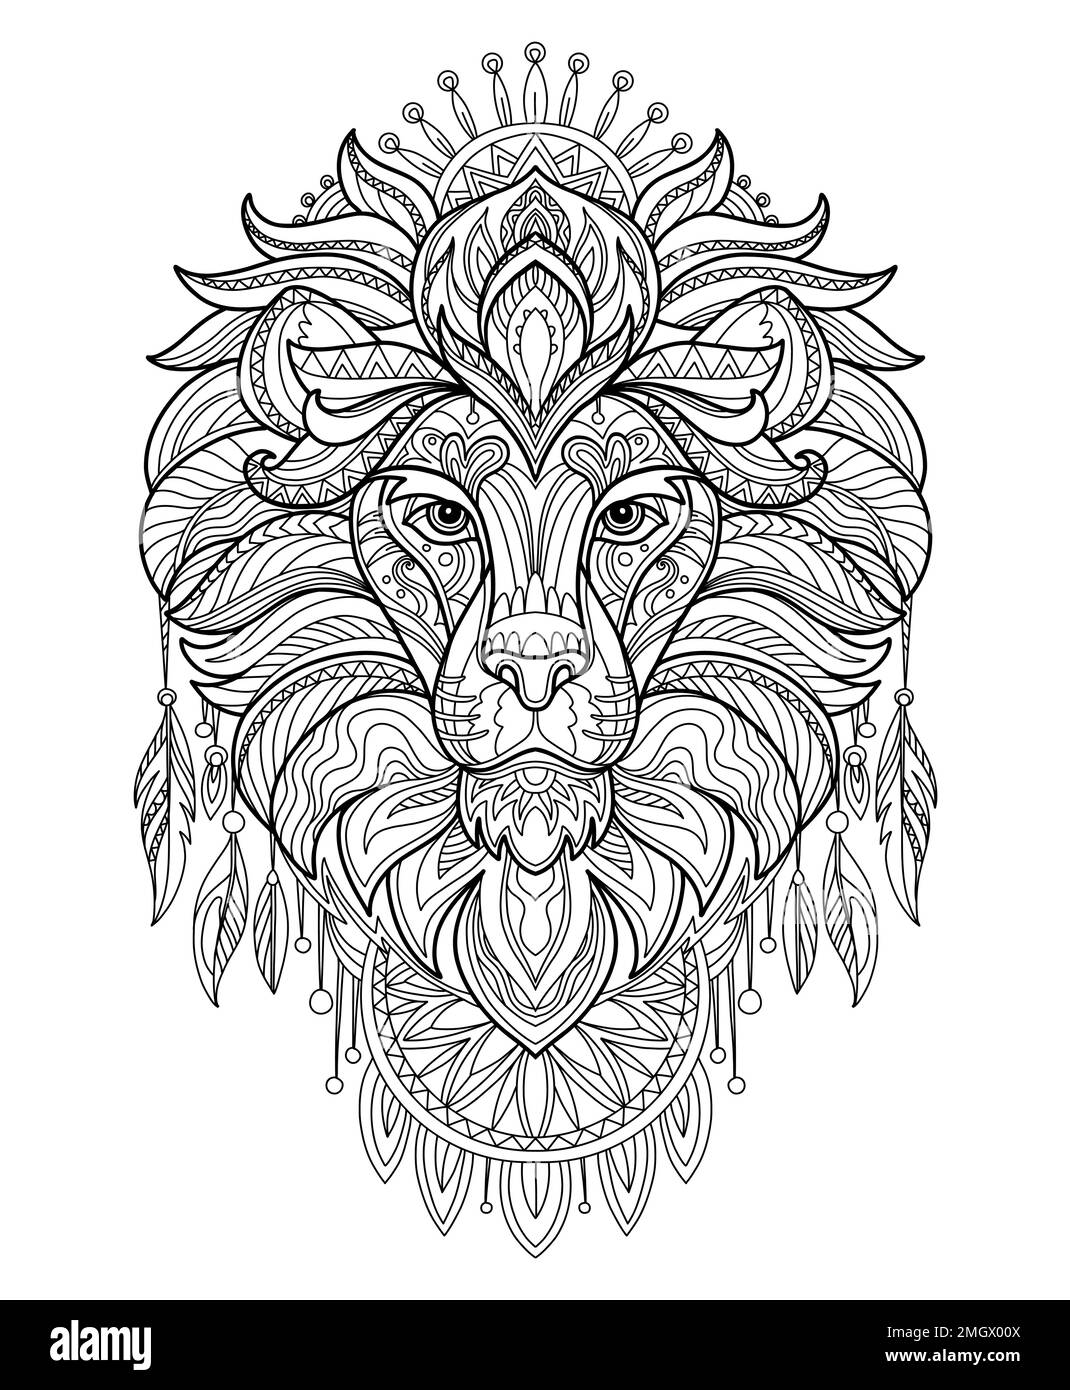 Stylized head of lion close up. Hand drawn sketch black contour vector illustration. For adult antistress coloring page, print, design, decor, T-shirt Stock Vector